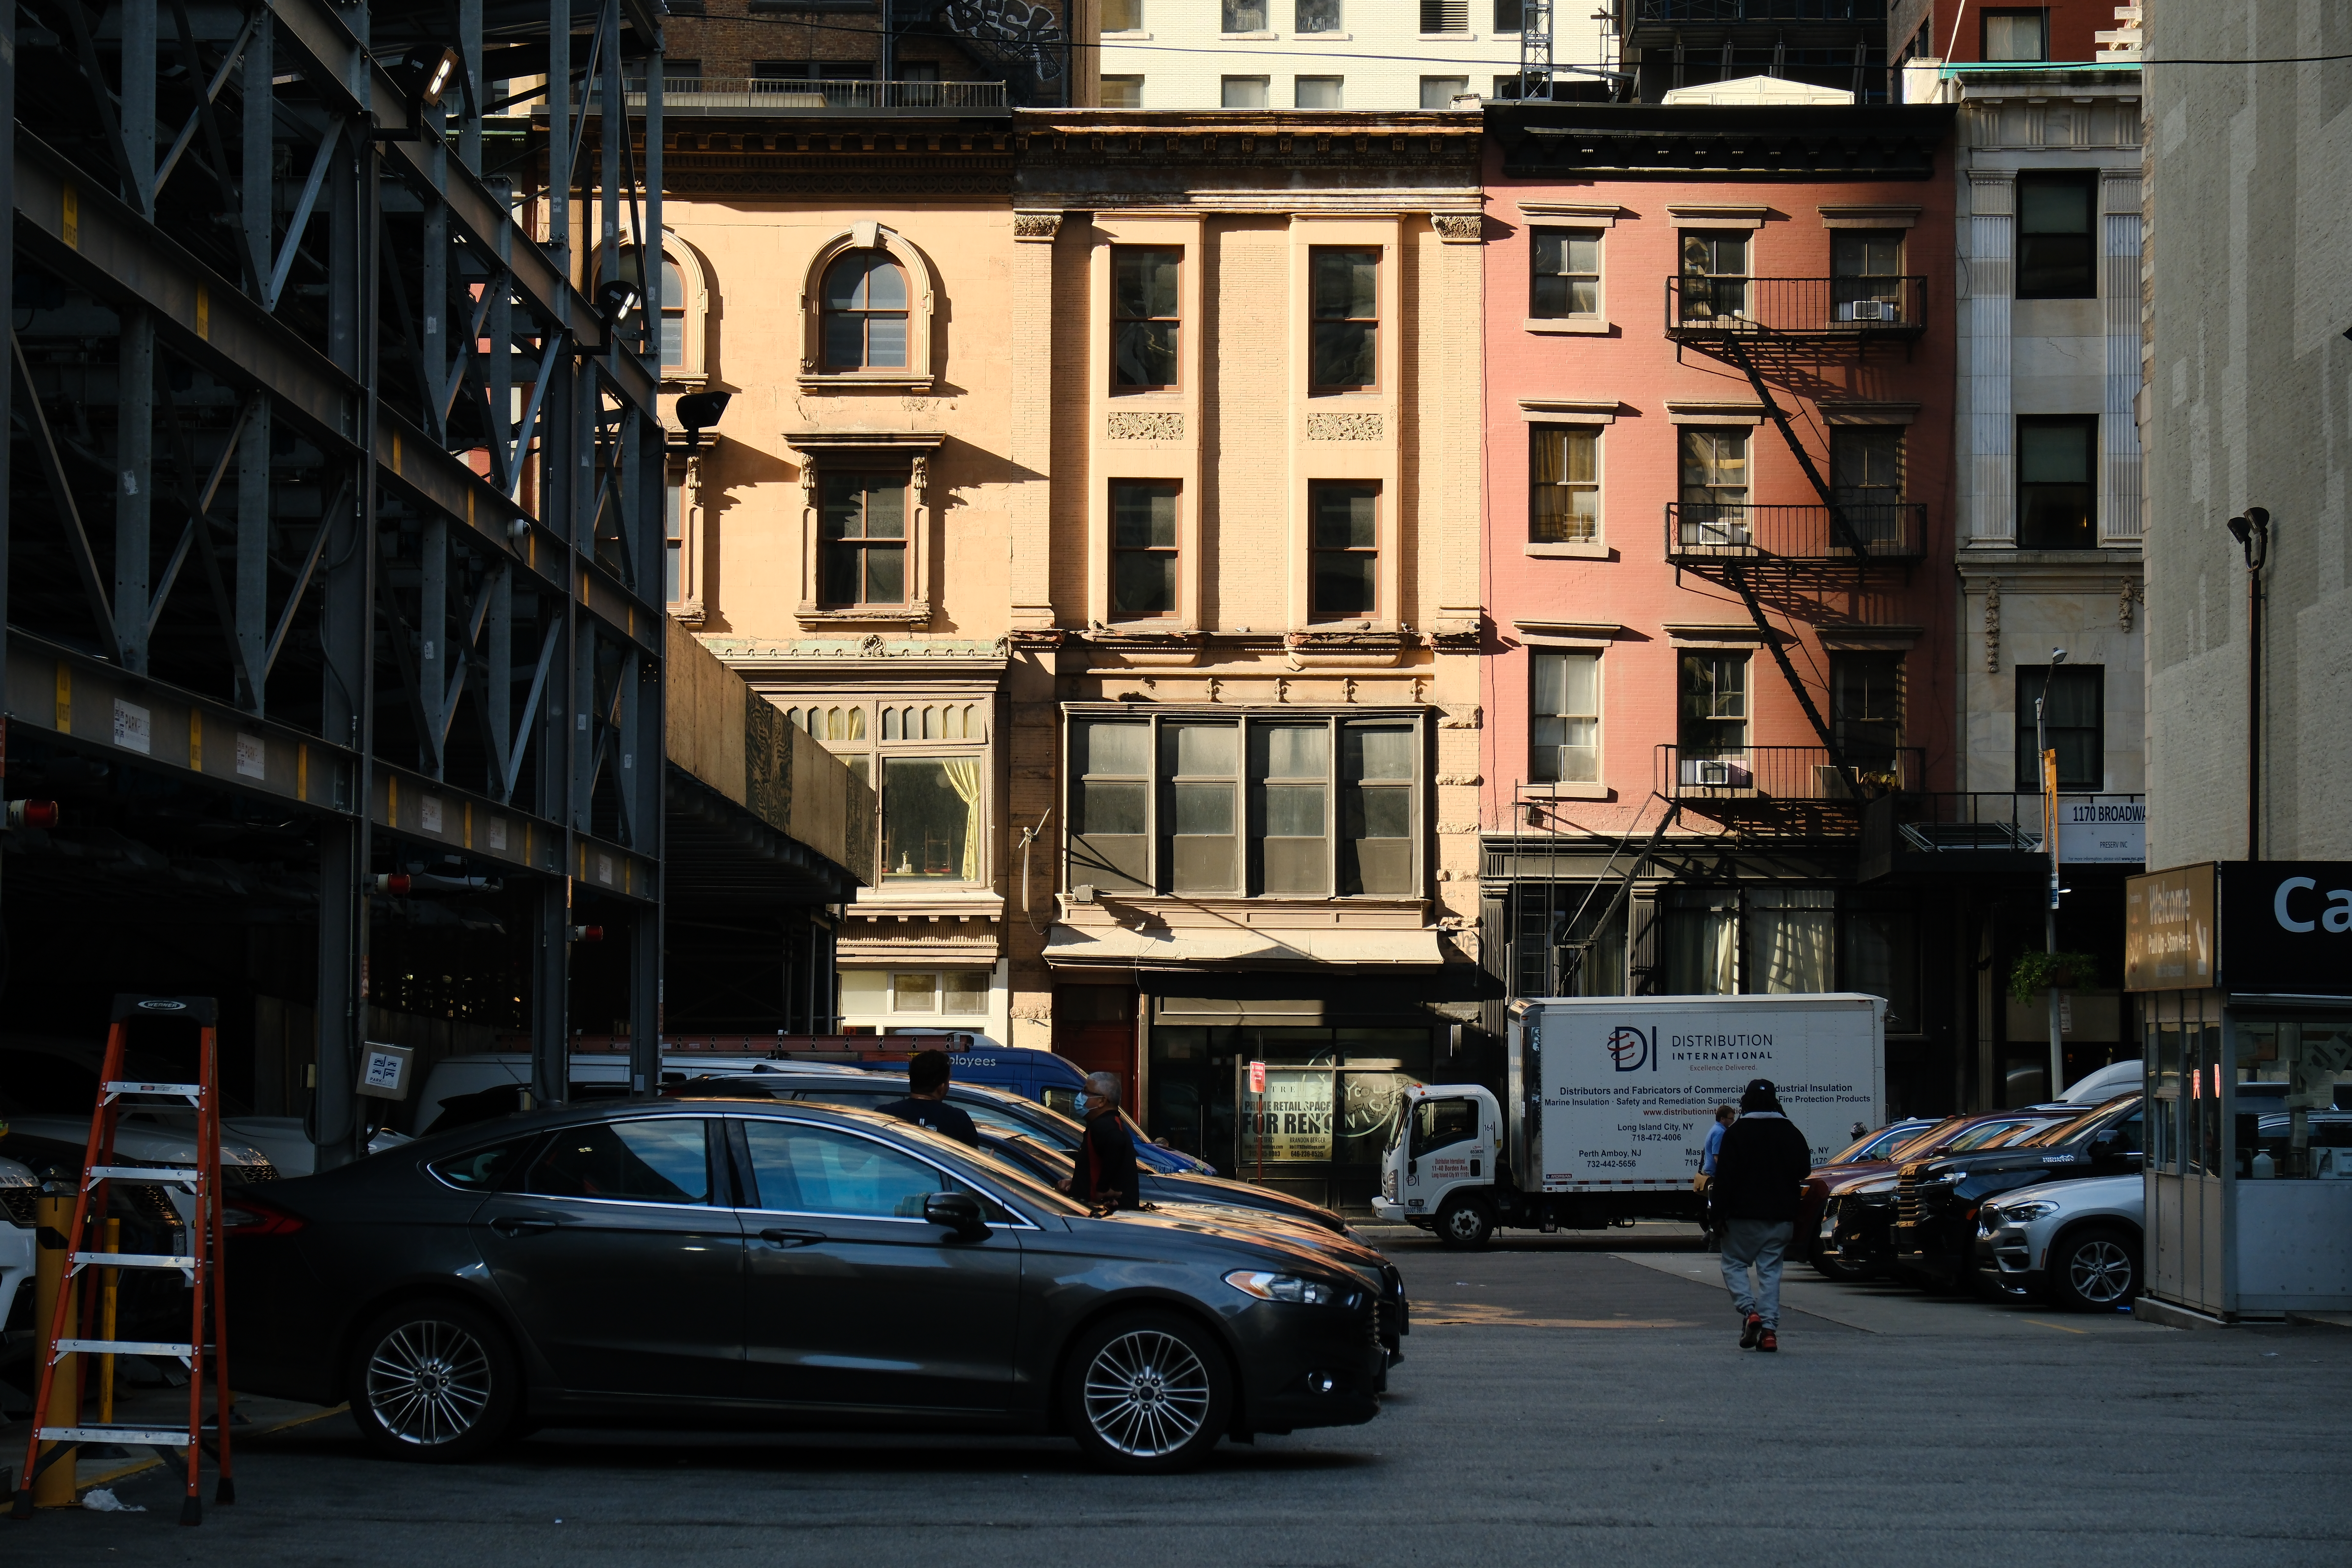 New York parking, Fujifilm X-H2 with 16-55mm F2.8 lens, at 55mm, 1/300s, f/5.6, ISO500 (DR400), -0.3ev, Photo: Joshua Waller